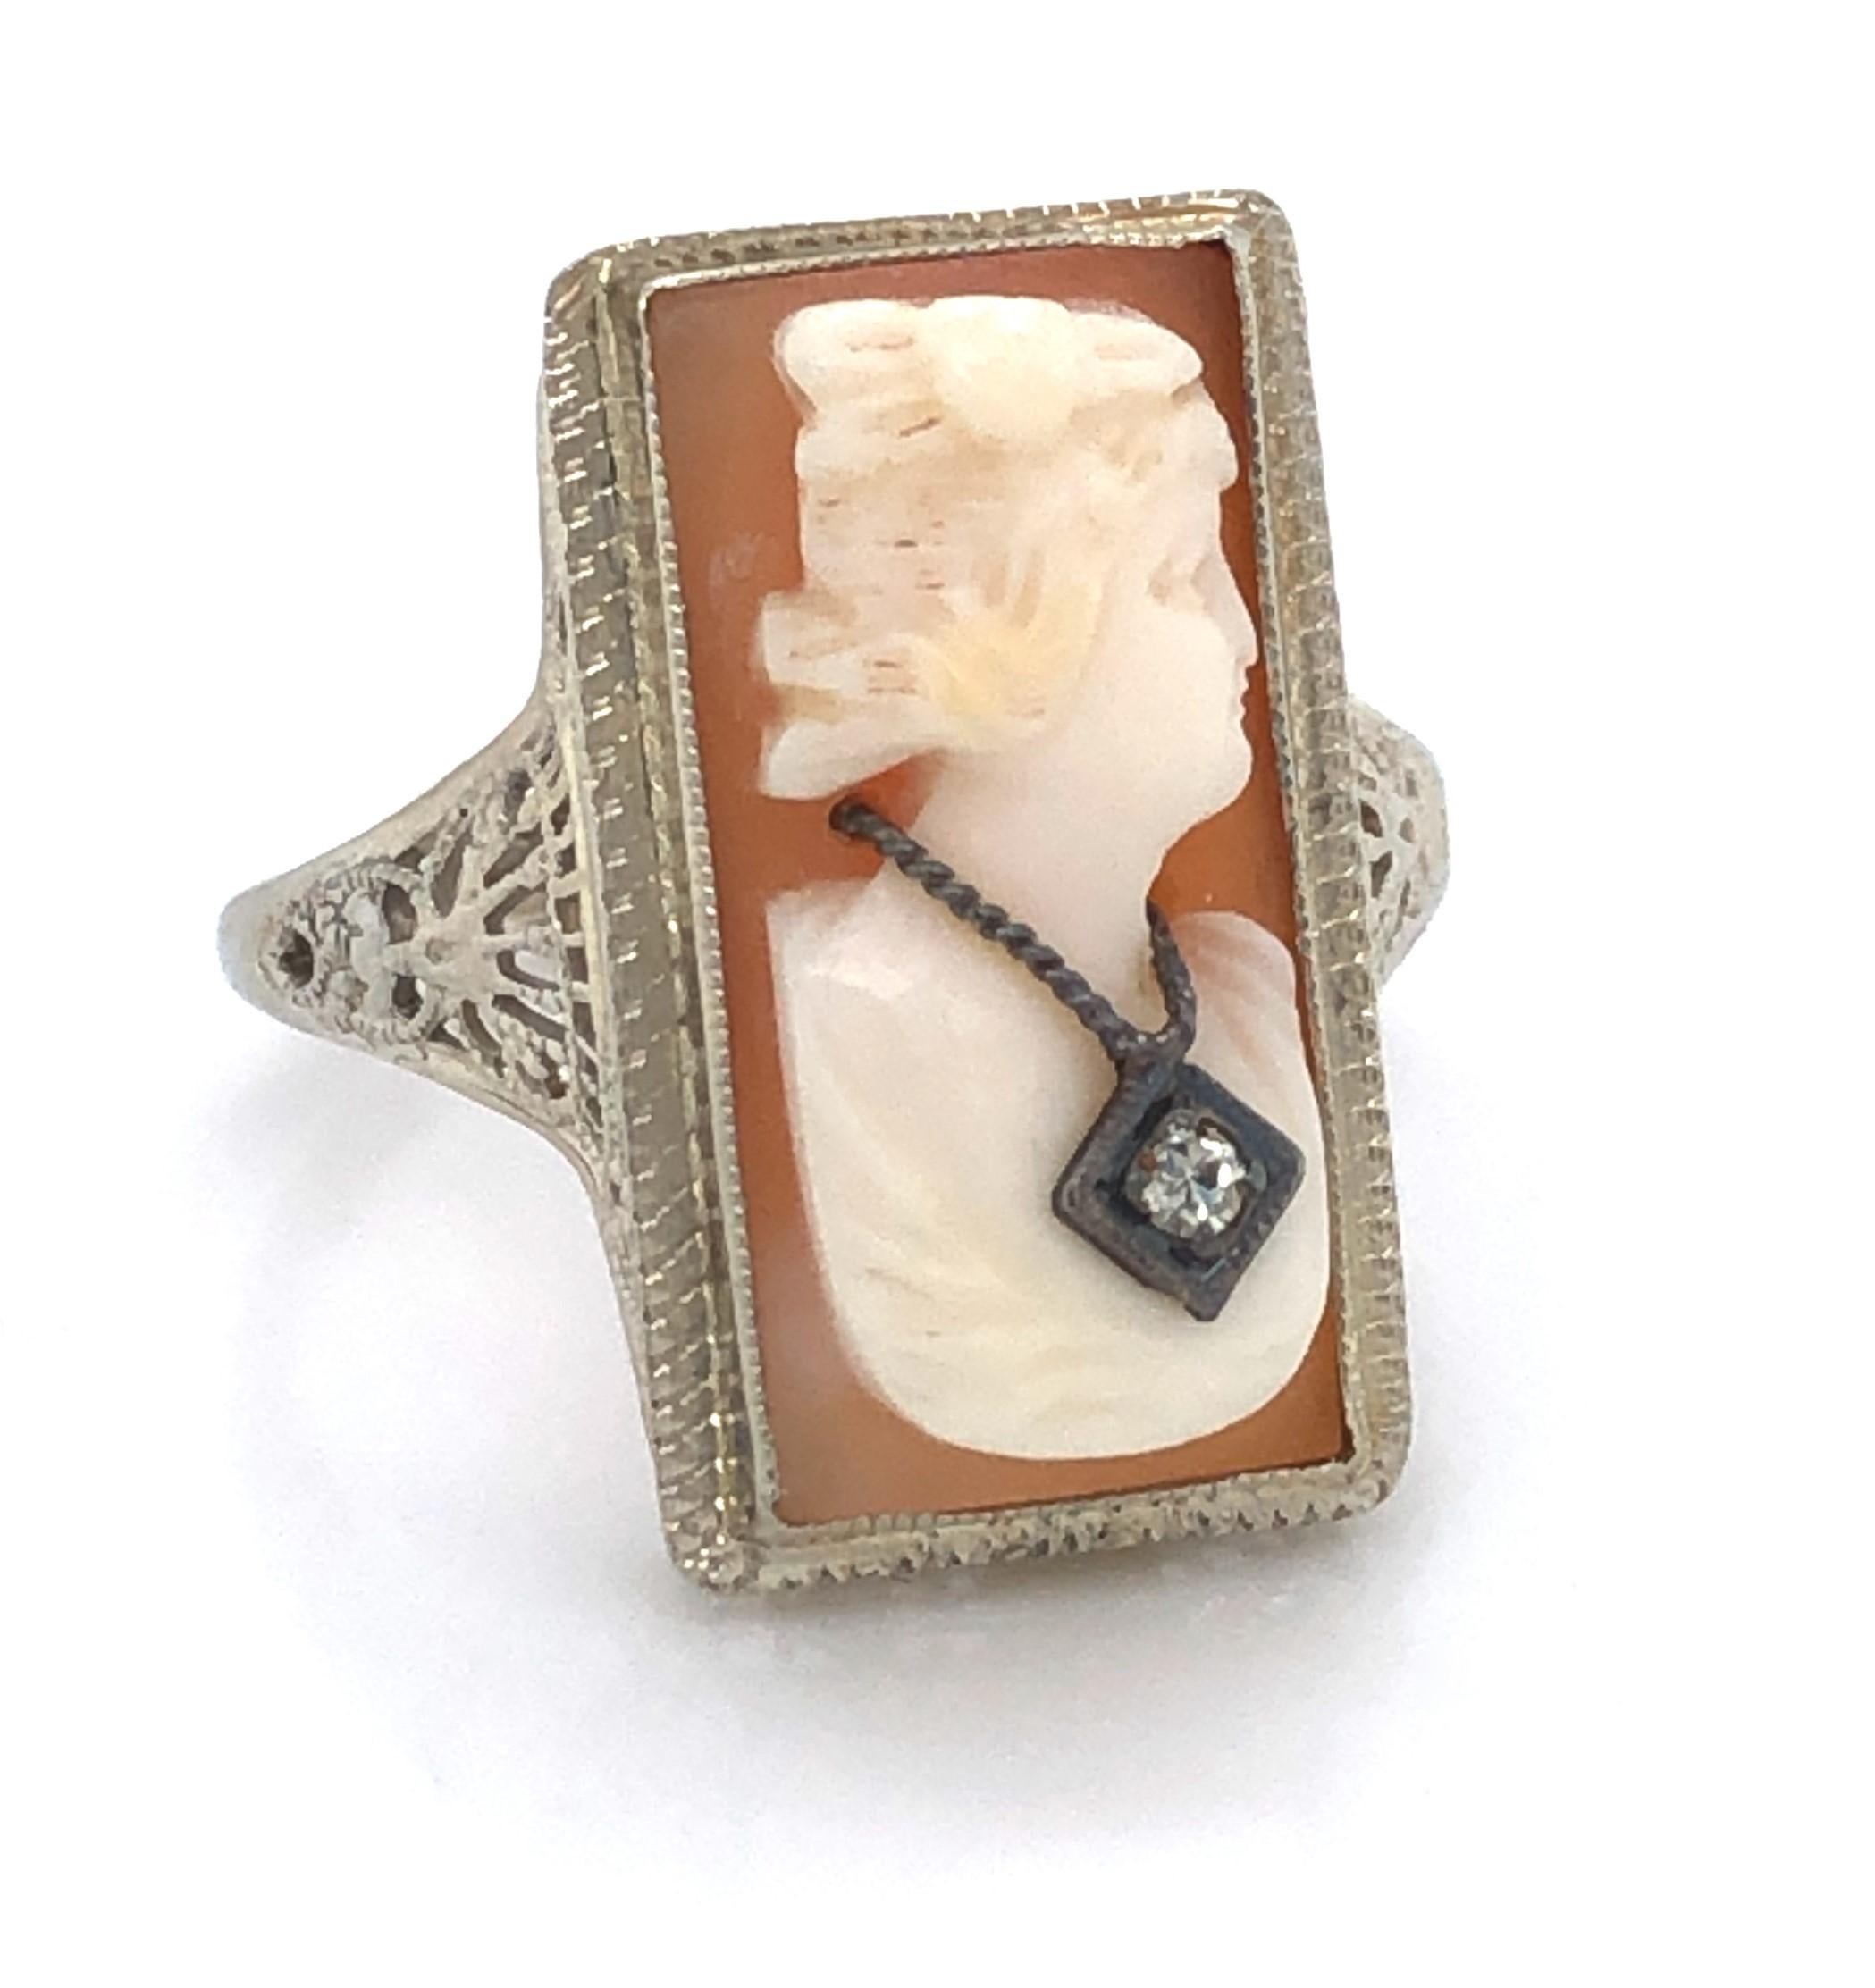 Elegantly presented in a fancy fourteen karat 14k white gold filigree antique ring setting, this hand carved natural shell cameo ring romantically portrays the bust of a fine lady of the period proudly wearing her decorative pendant. Artfully